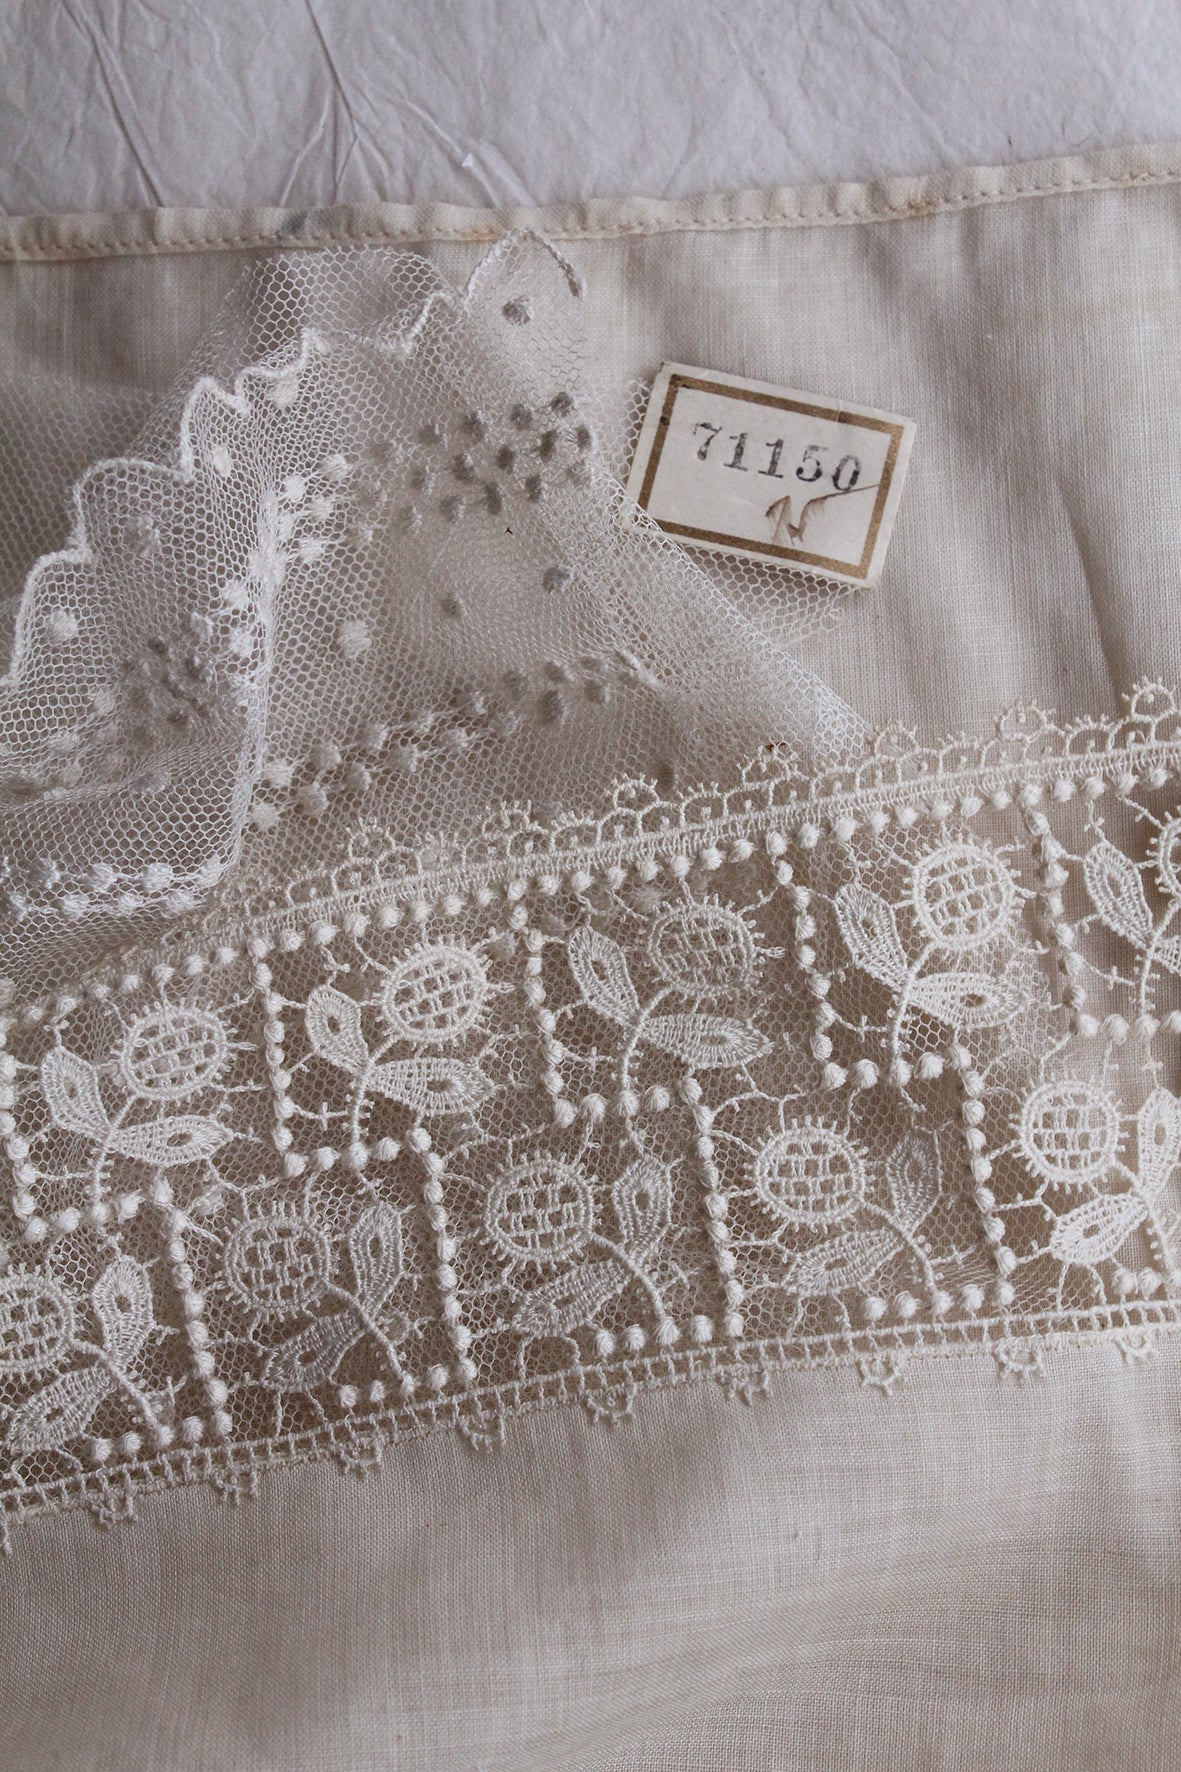 Collection of Antique Lace Samples - B4